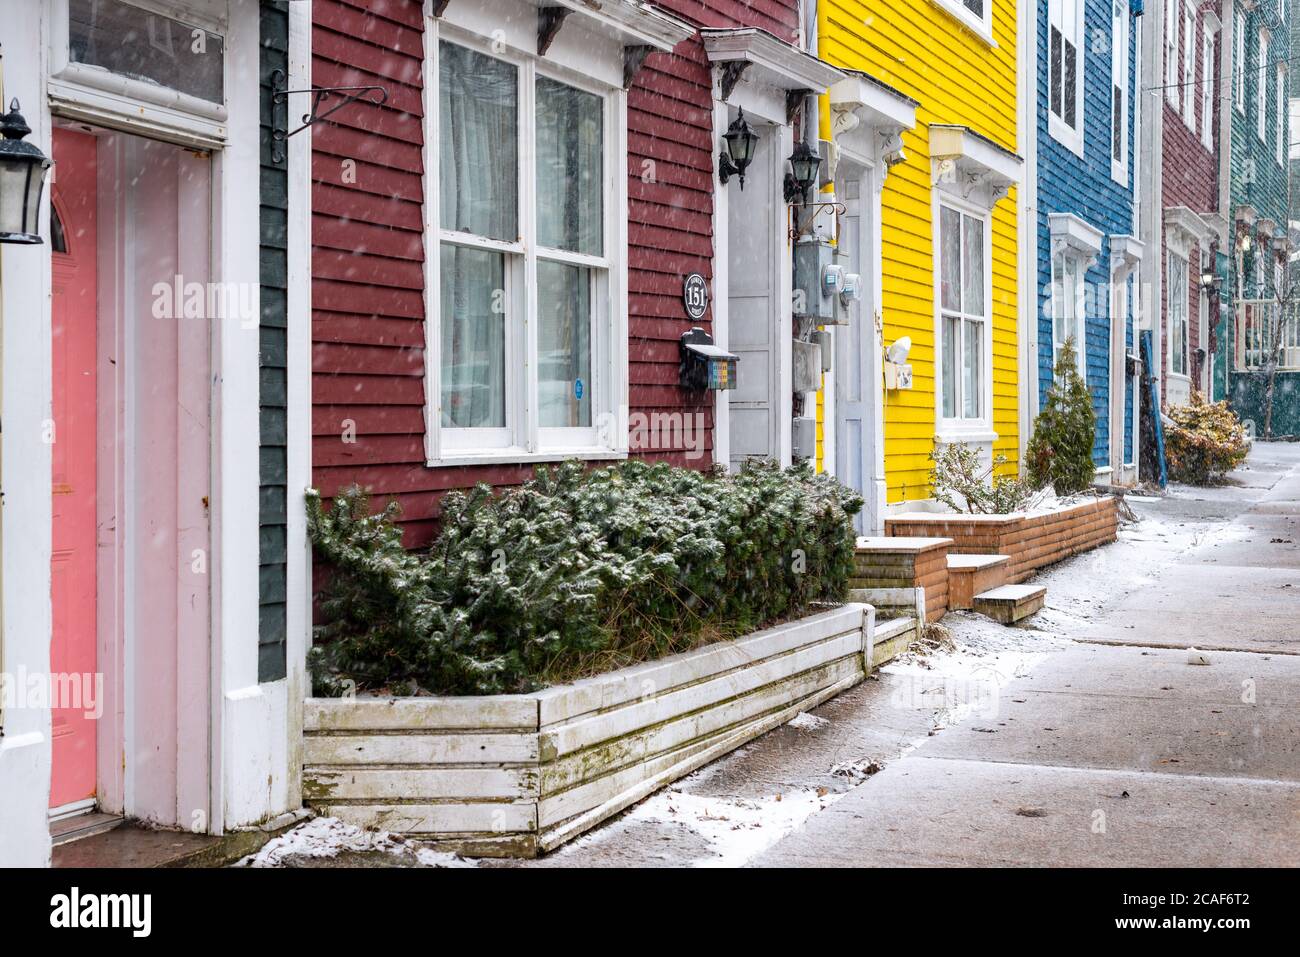 Exterior of multiple brightly colorful adjoining row houses with large windows and doors. There's snow on the ground and sidewalk near the buildings. Stock Photo